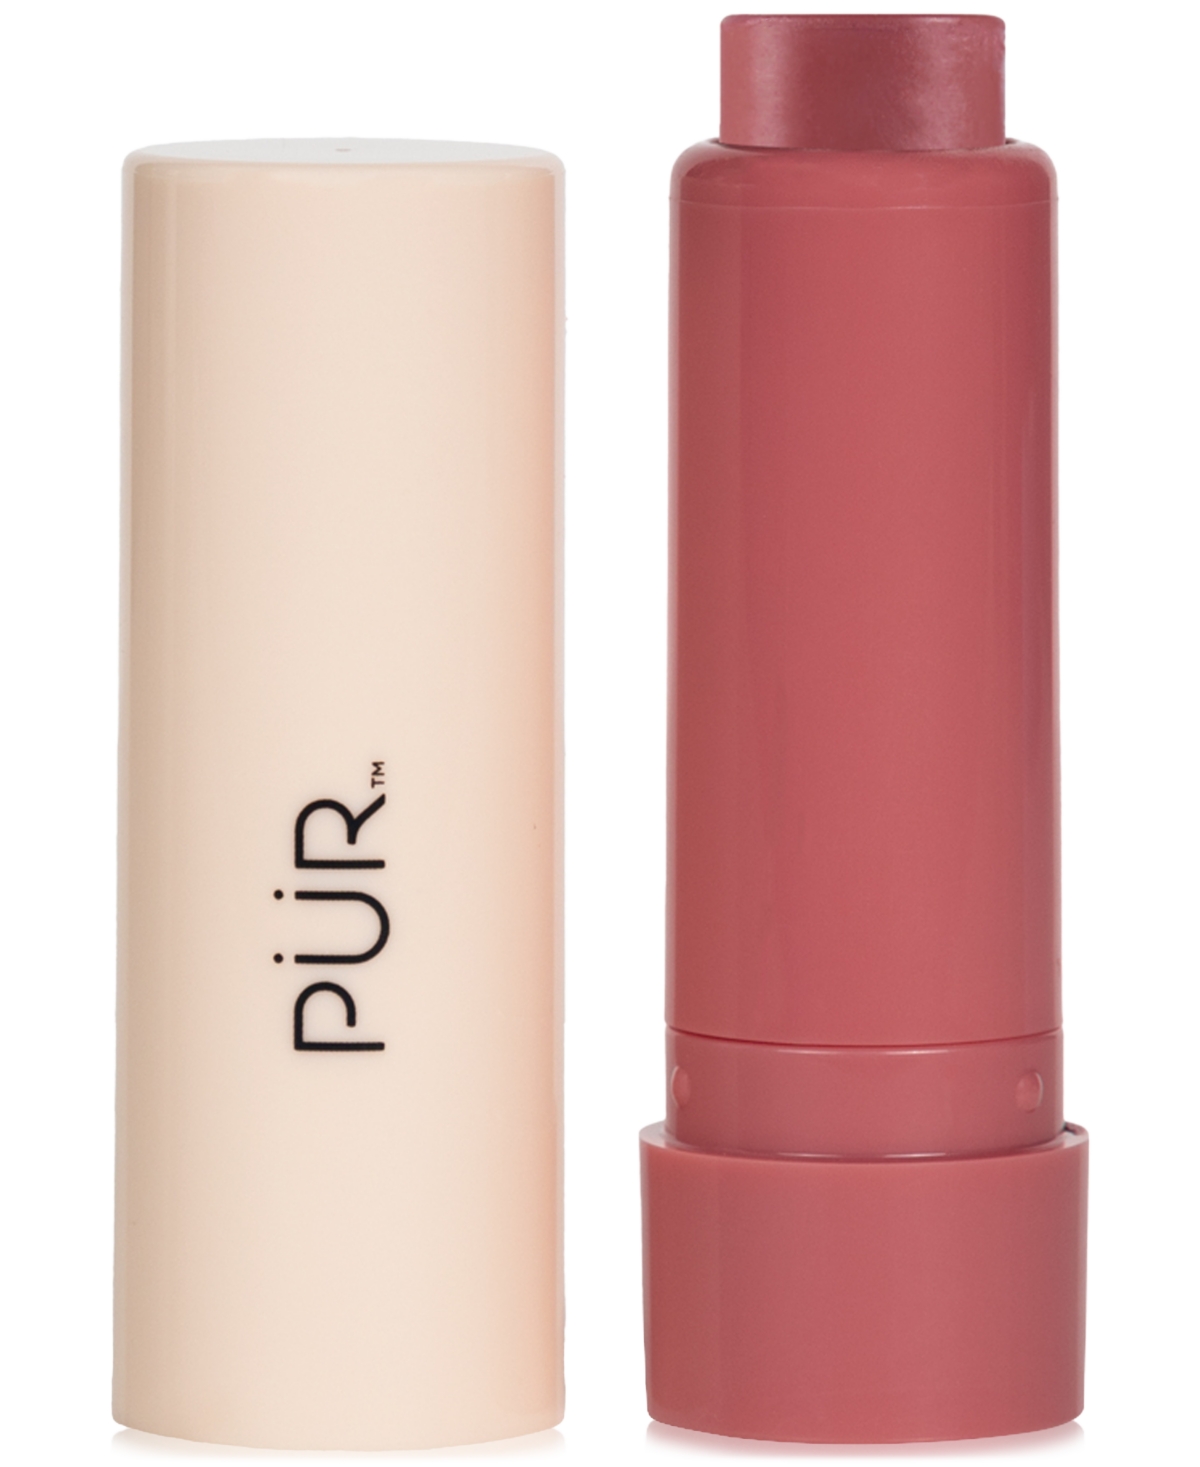 Silky Tint Creamy Multitasking Stick With Peptides - Berry Best